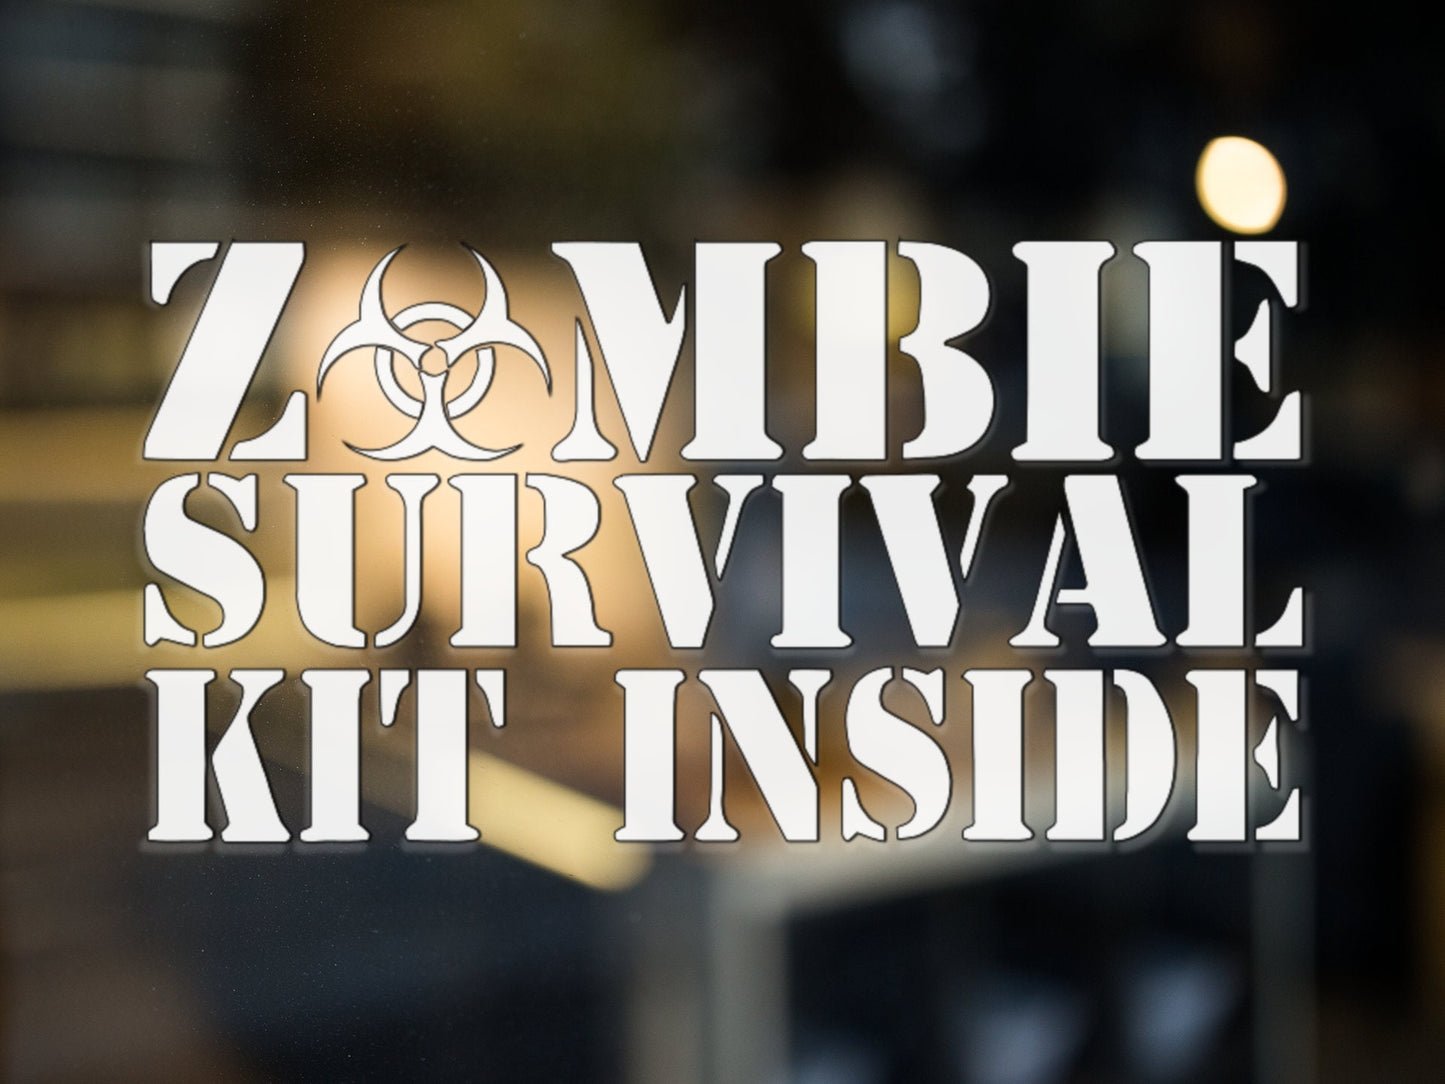 Zombie Survival Kit Inside Decal - Many Colors & Sizes